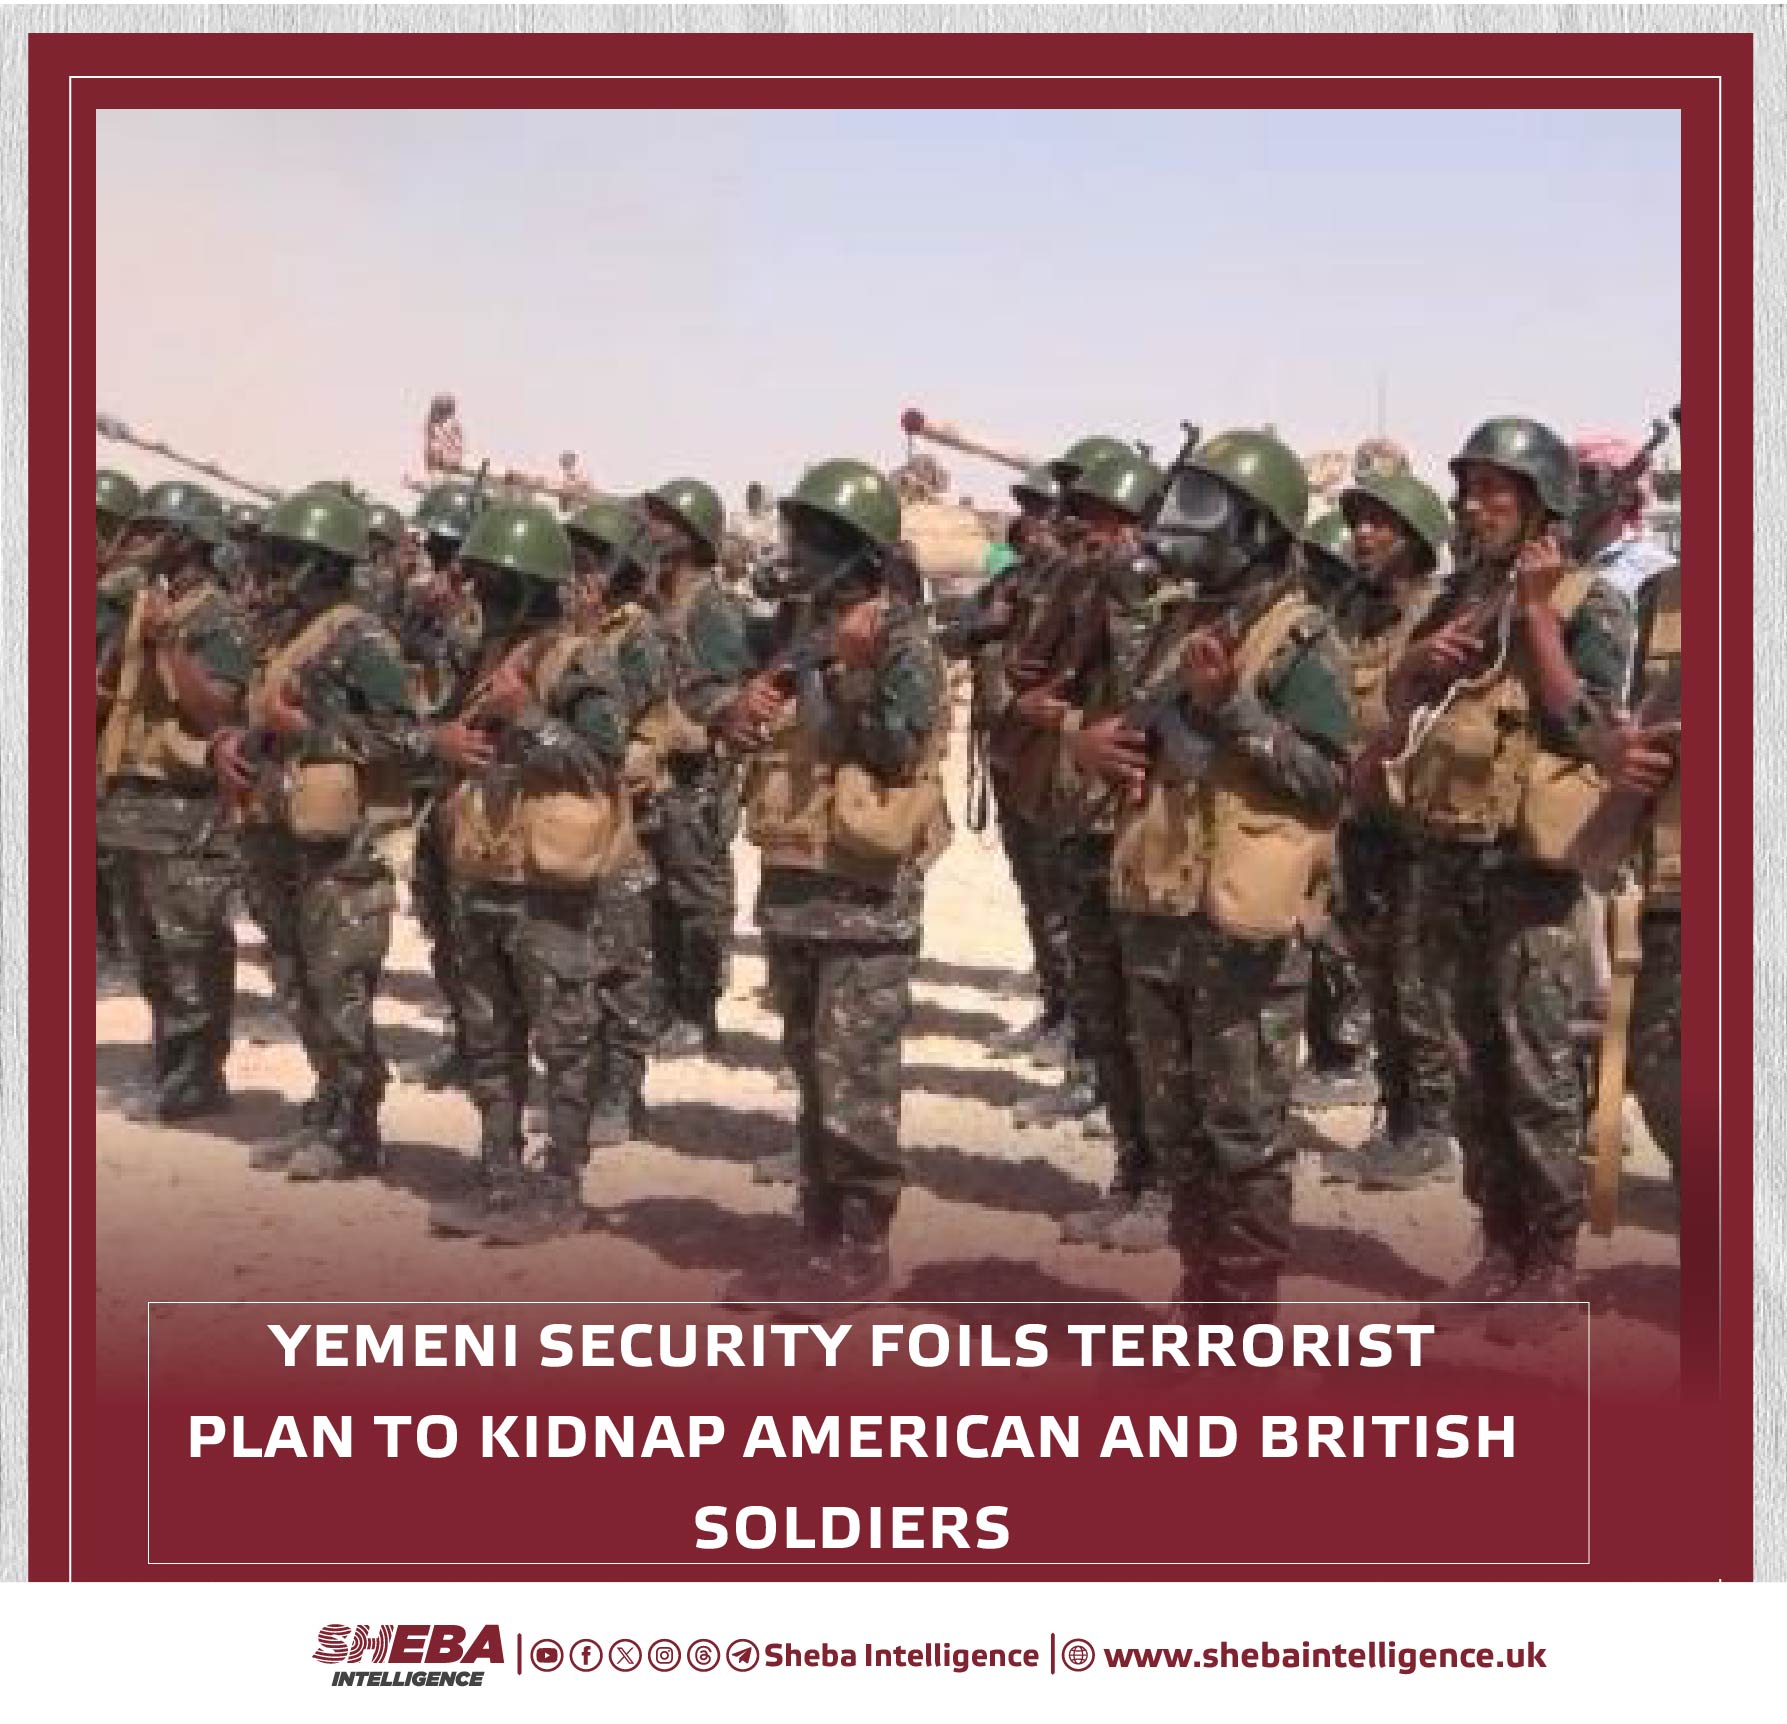 Yemeni Security Foils Terrorist Plan to Kidnap American and British Soldiers